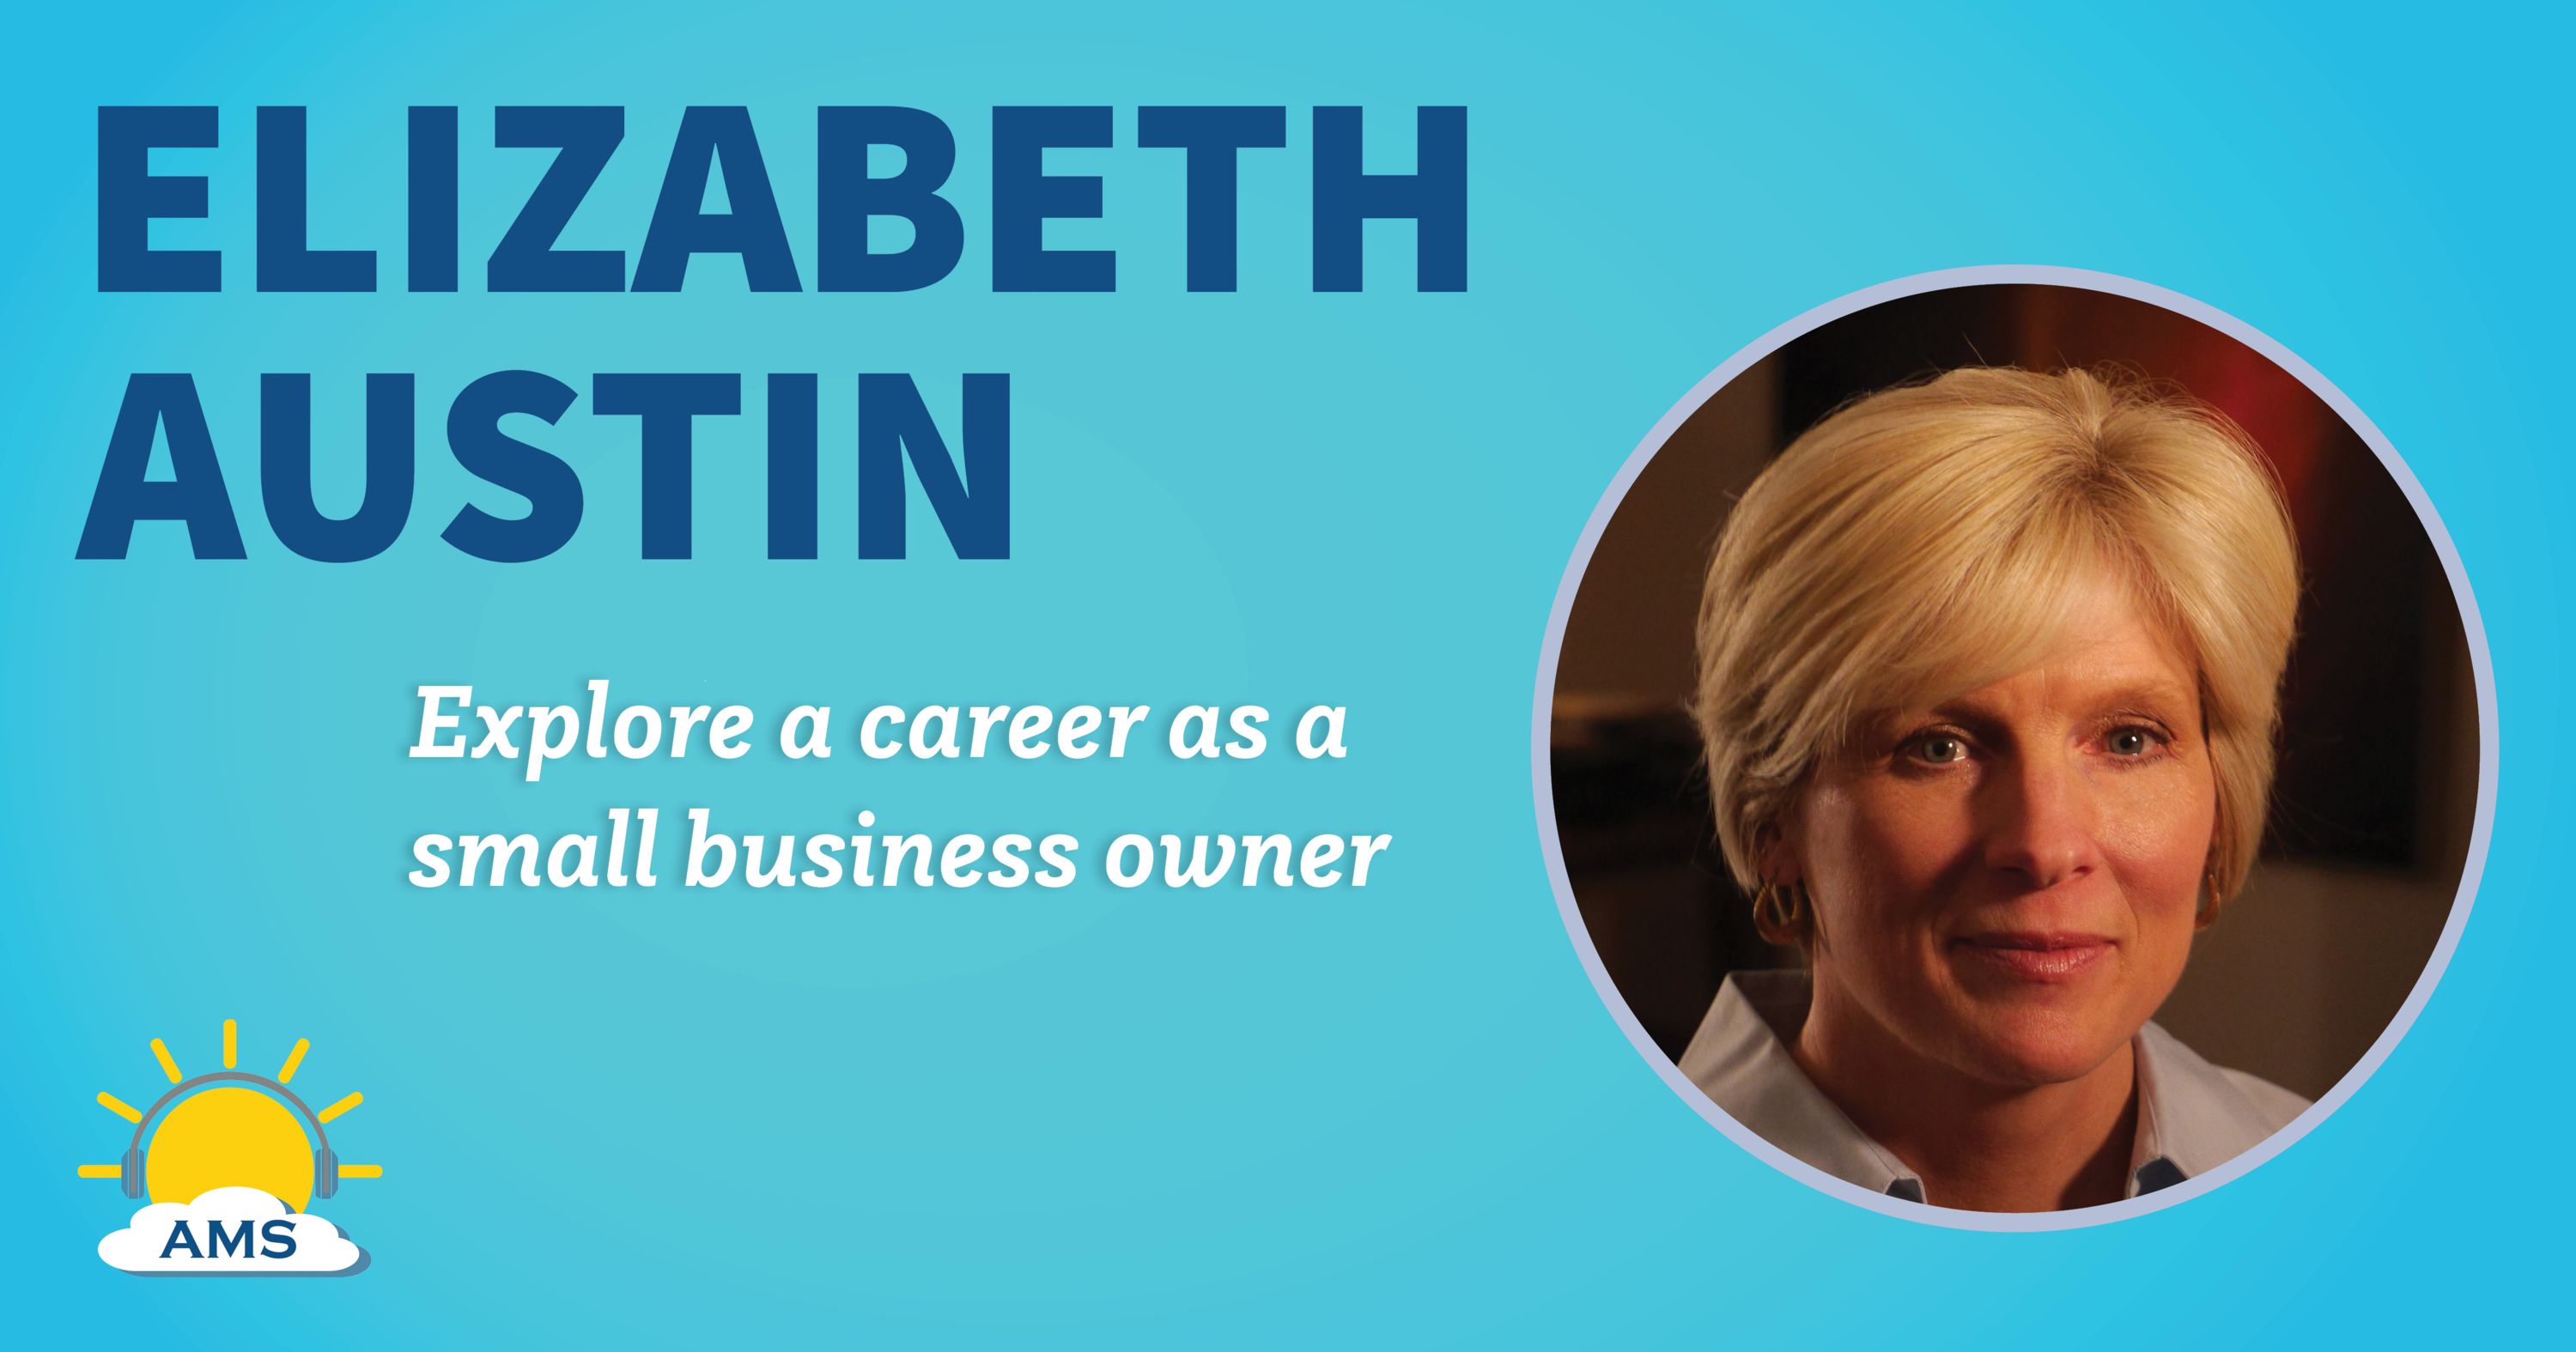 elizabeth austin headshot graphic with teaser text that reads &quotexplore a career as a small business owner"